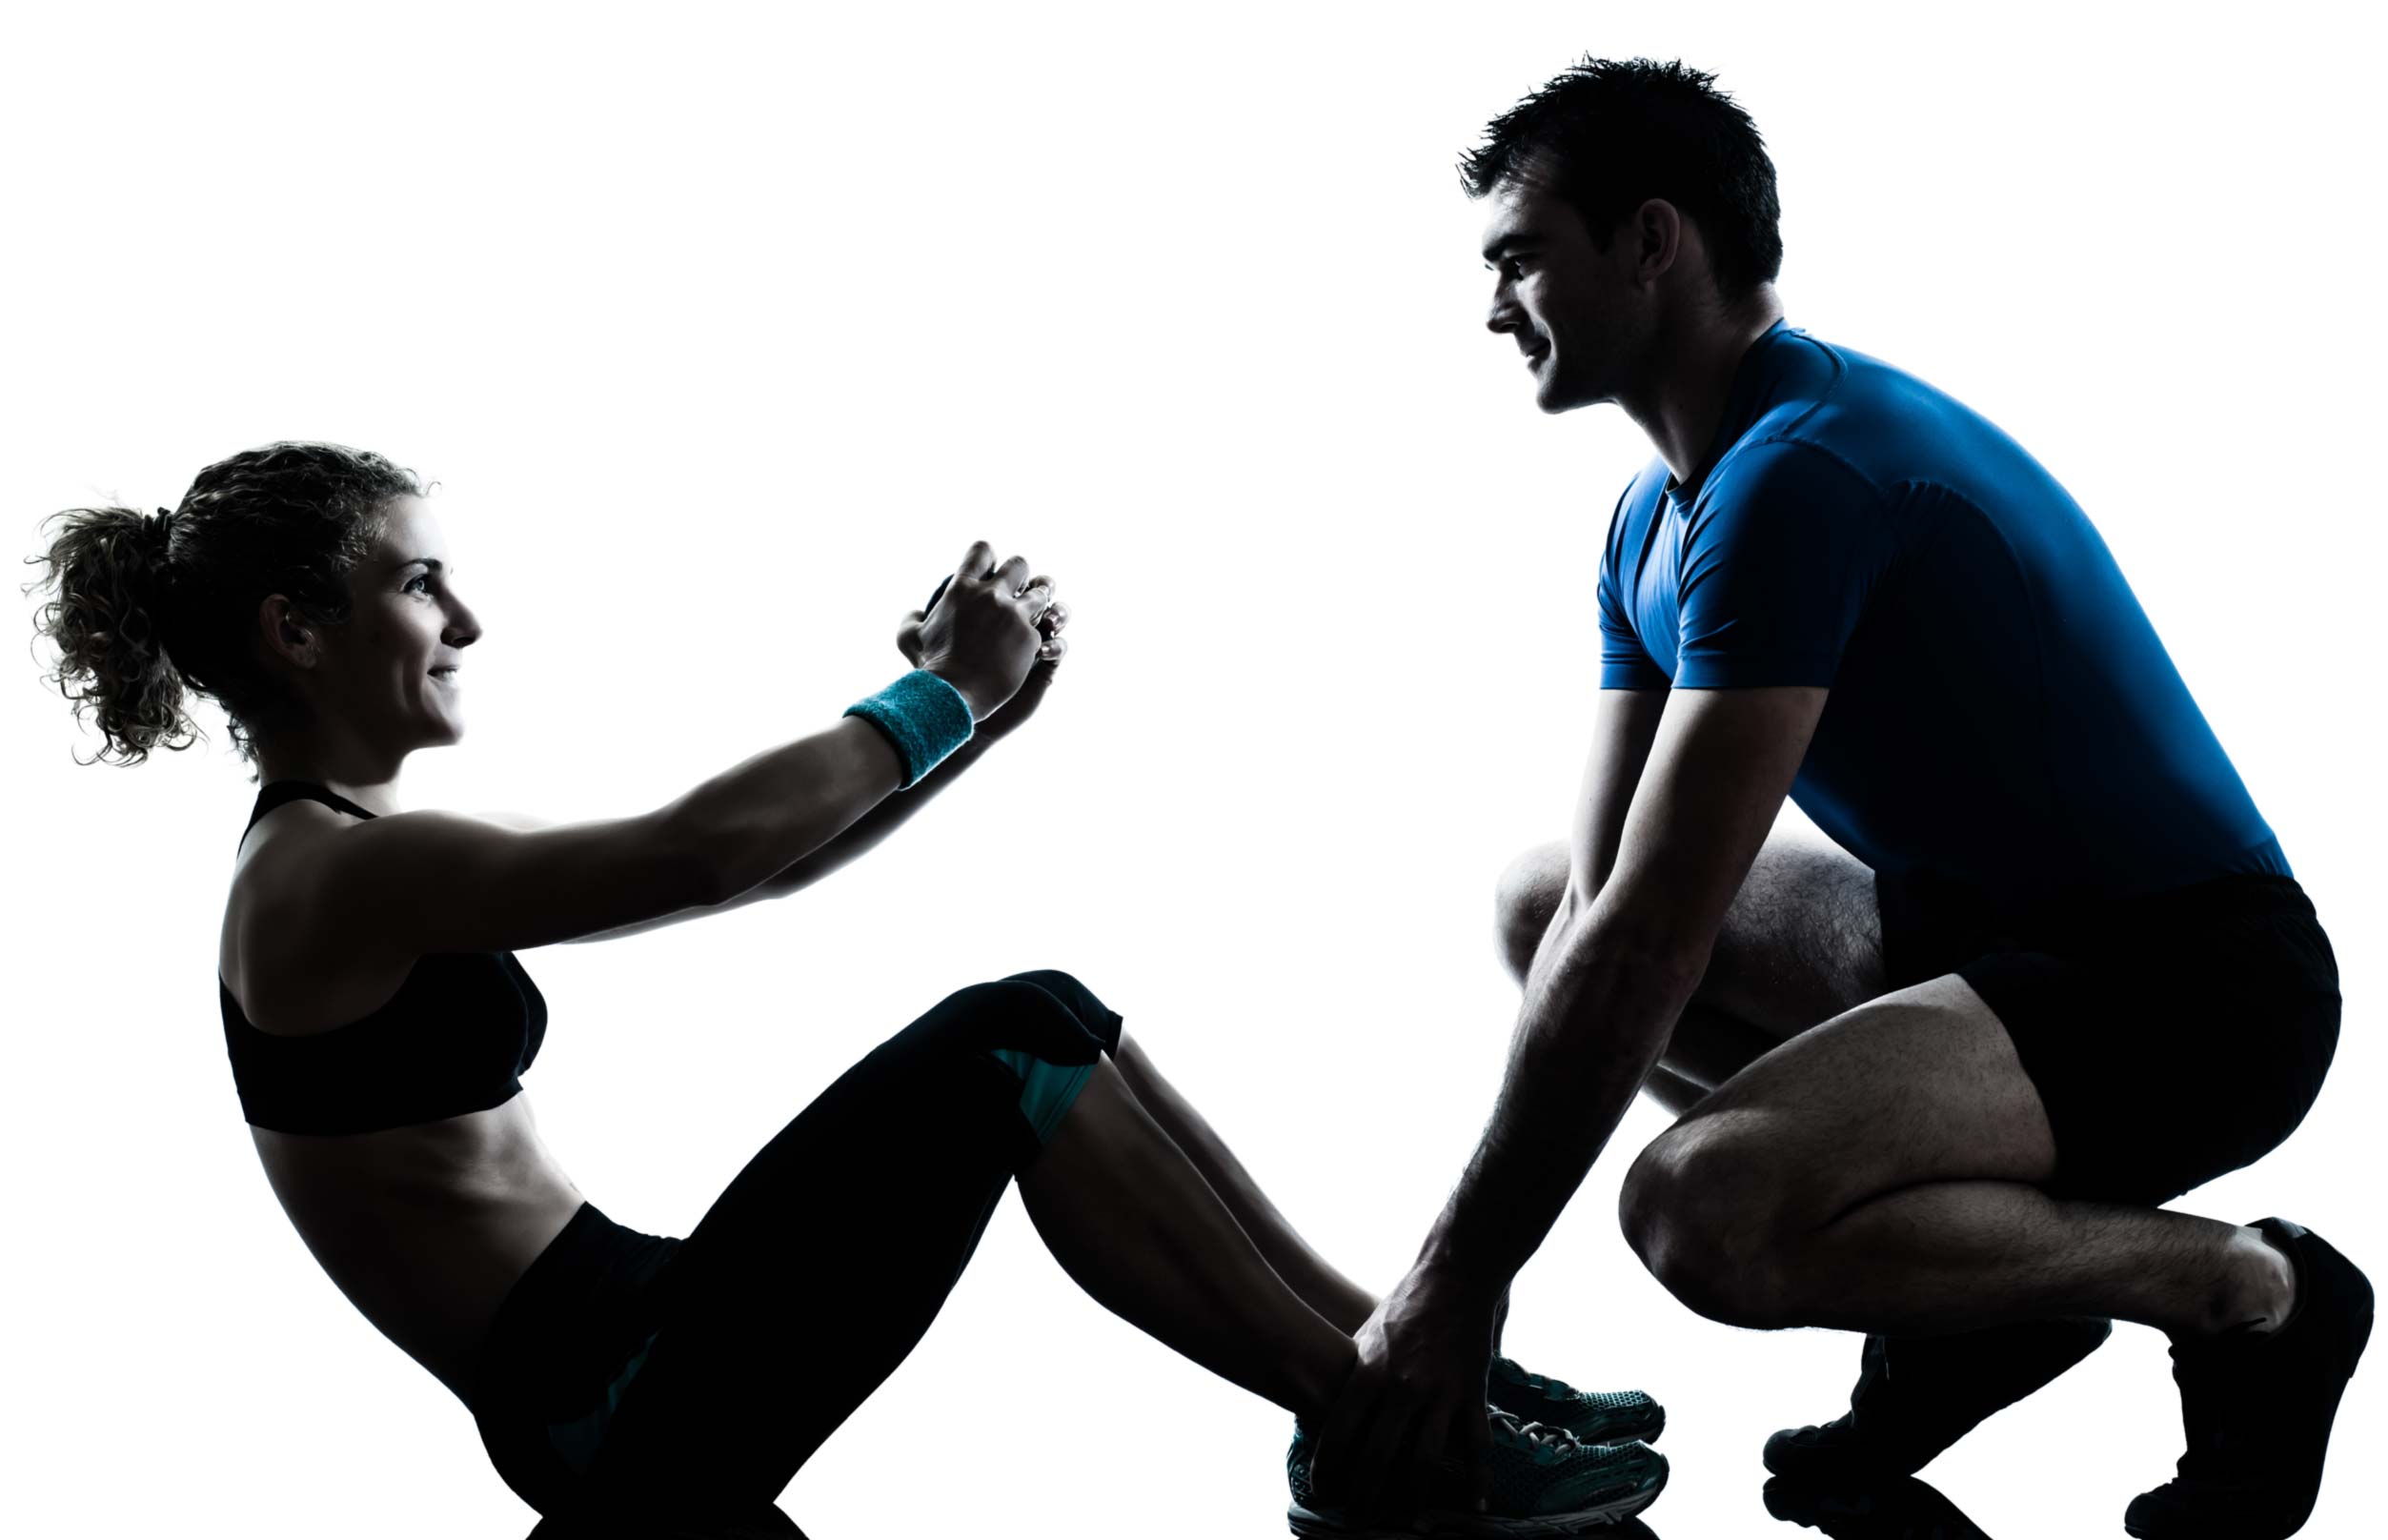 physiotherapy solutions - image of a man and woman exercising